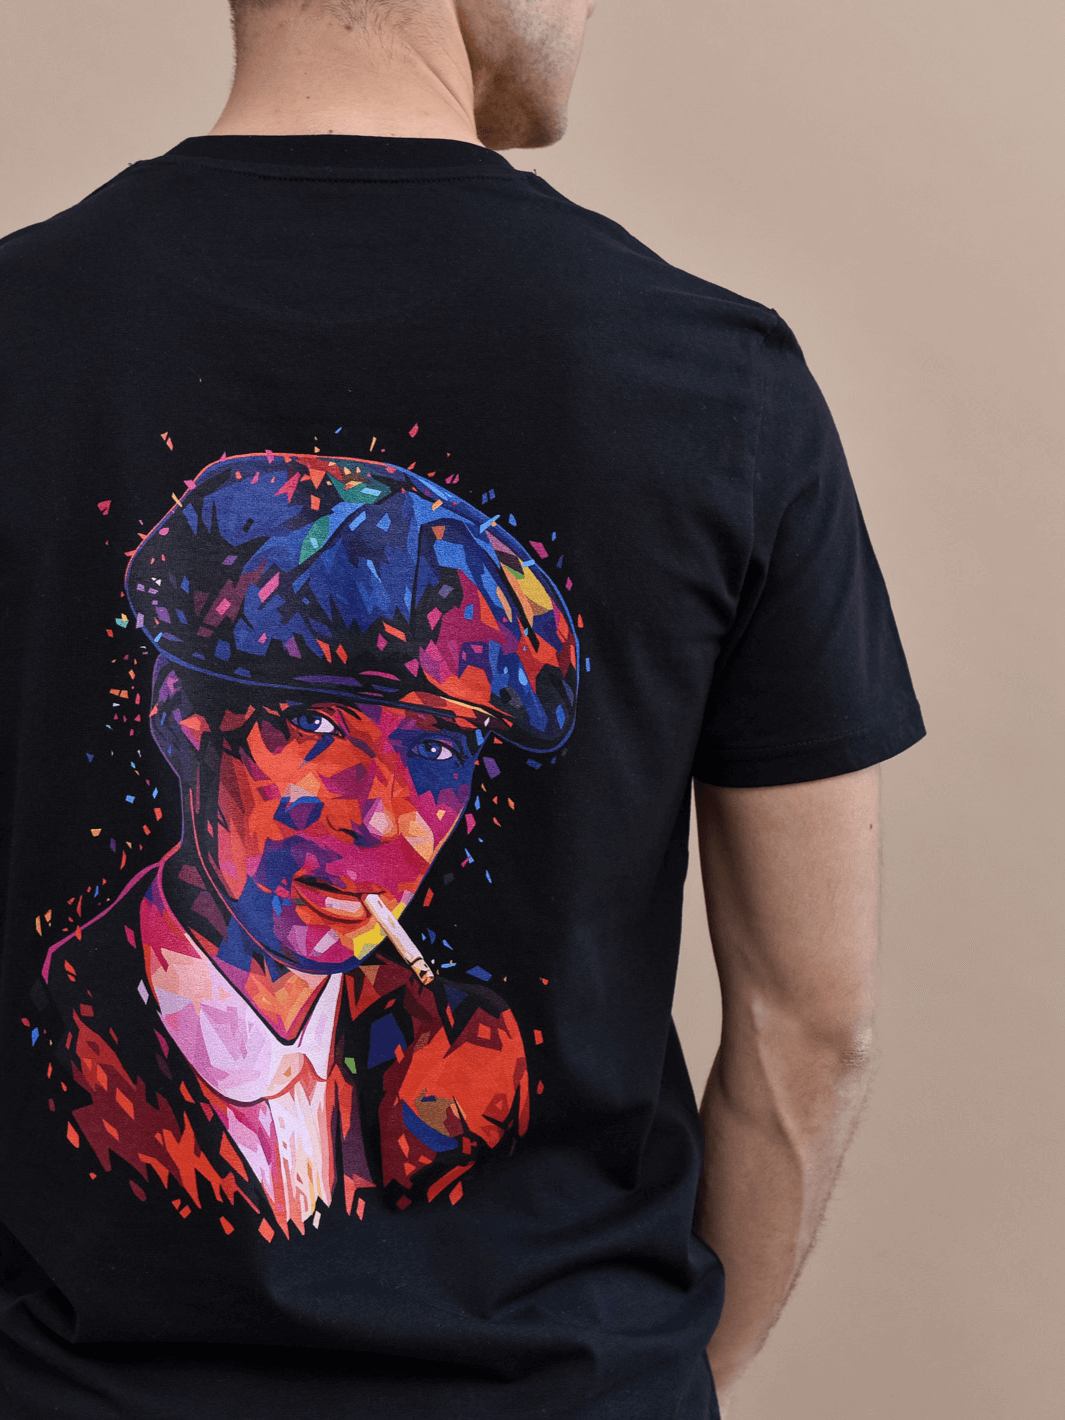 T-shirt nera Limitlex con stampa di Peaky Blinders.